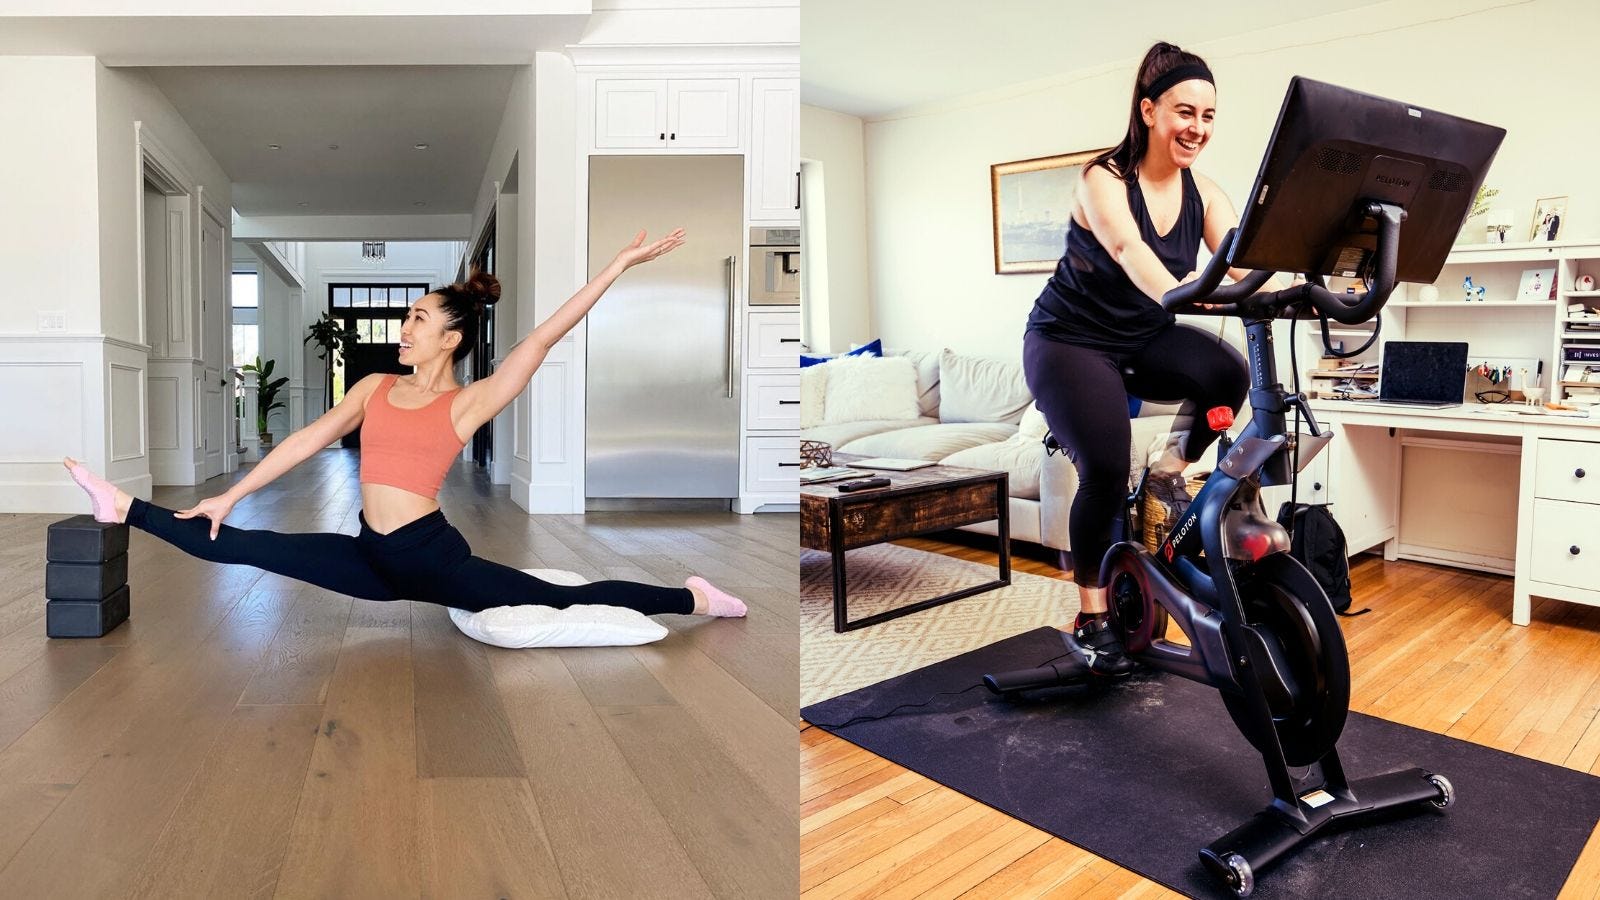 The Best Online Fitness Classes For Working Out At Home